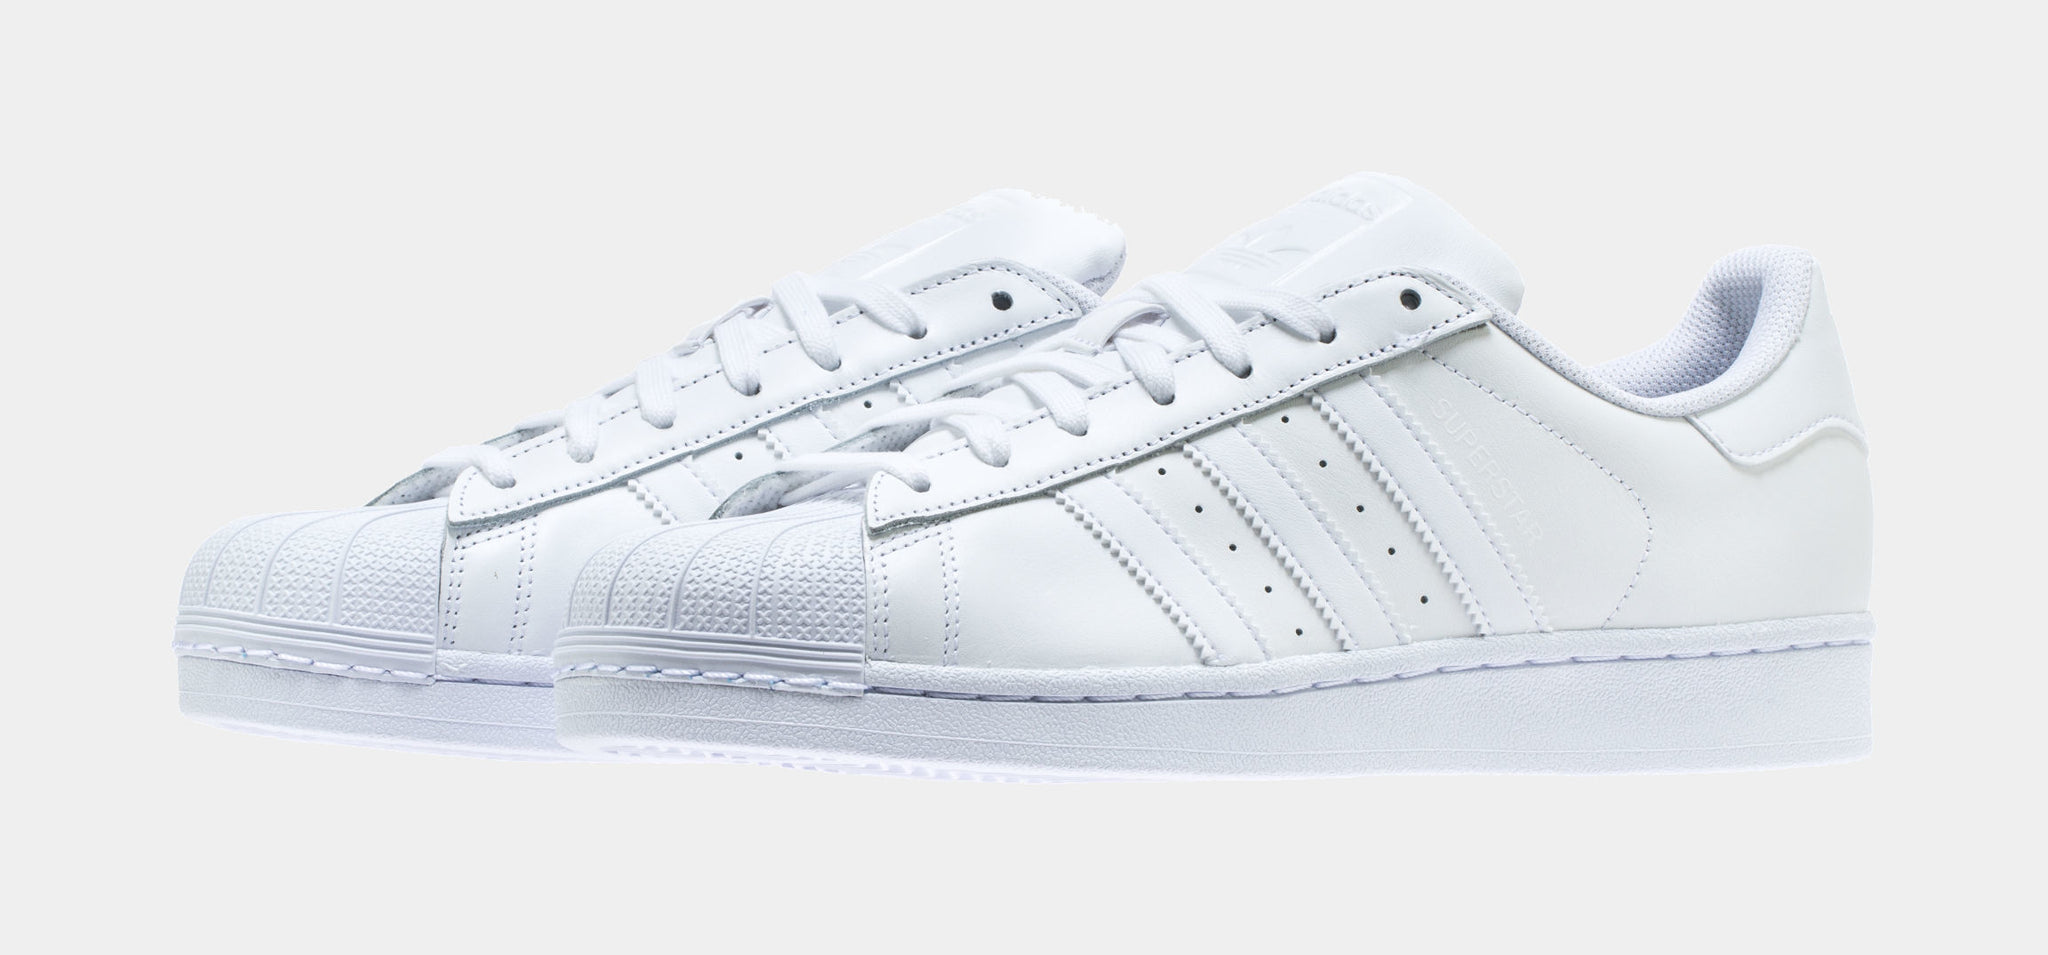 Shoes Adidas Superstar Shell Toe Pack • shop